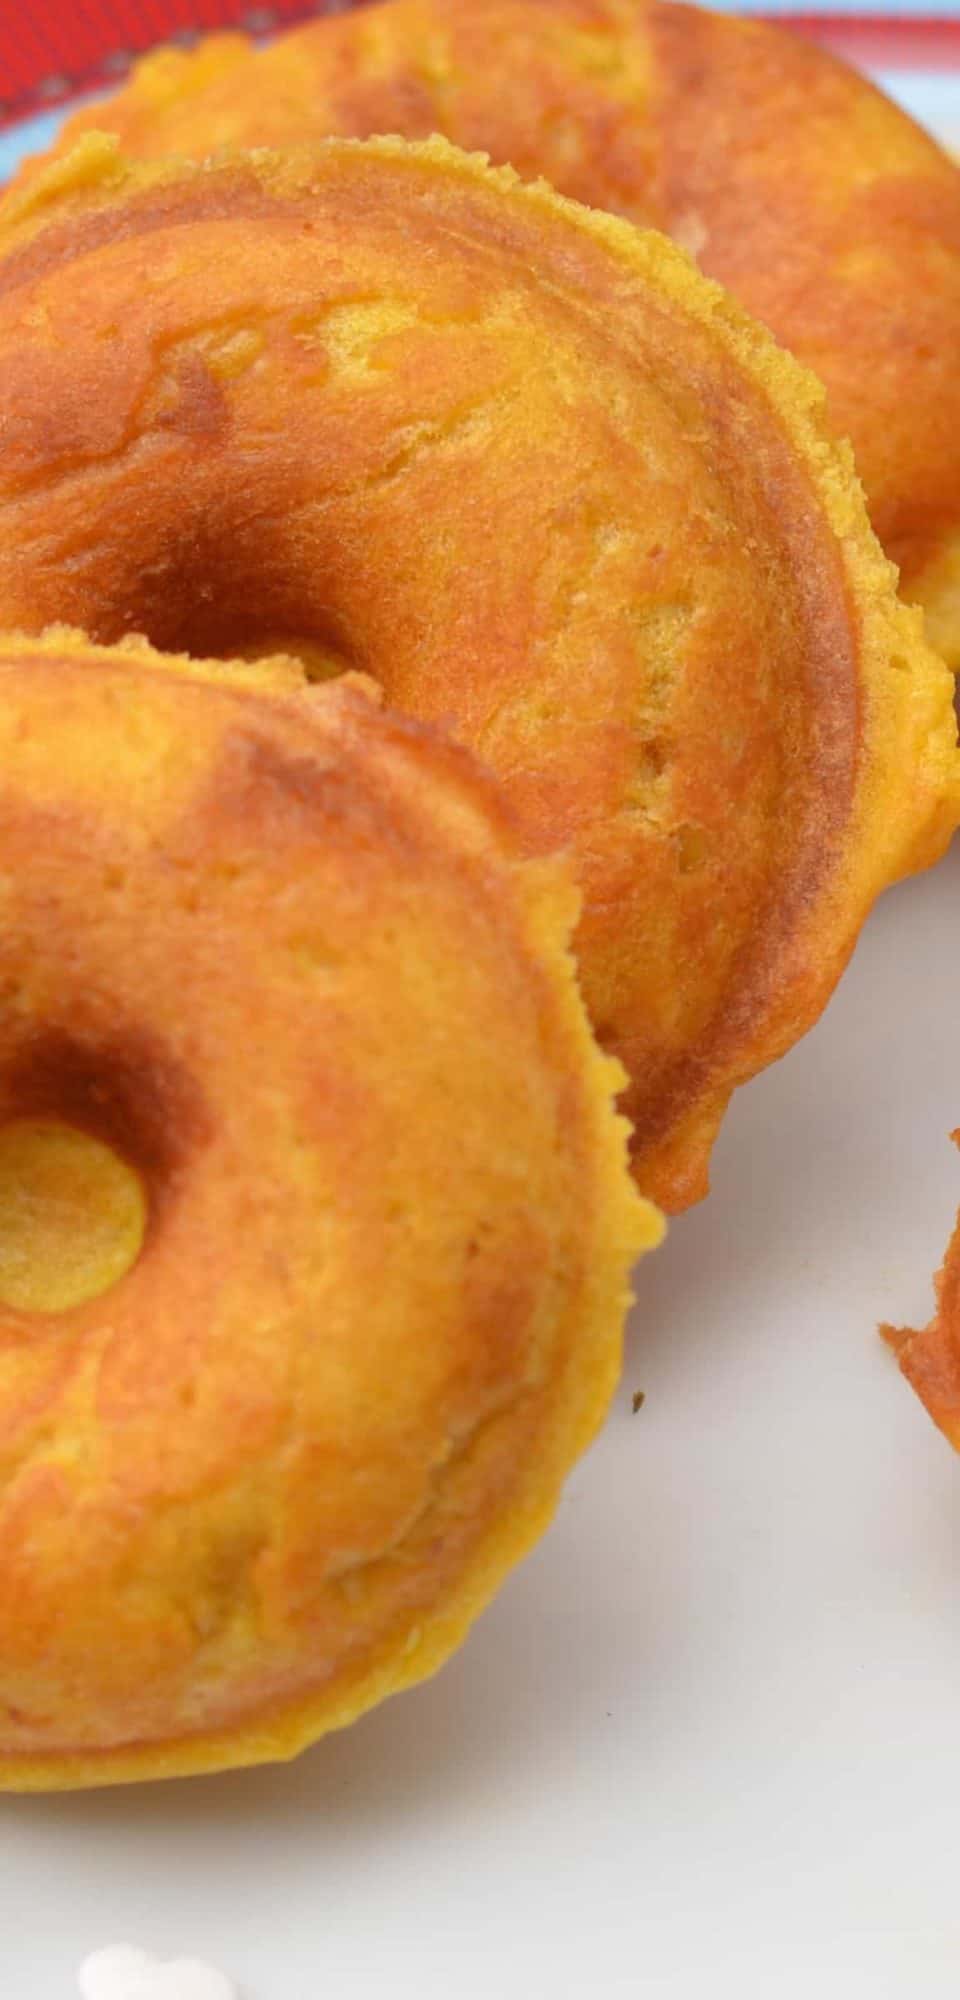 Pumpkin Mini Baked Donuts Recipe with apple sauce